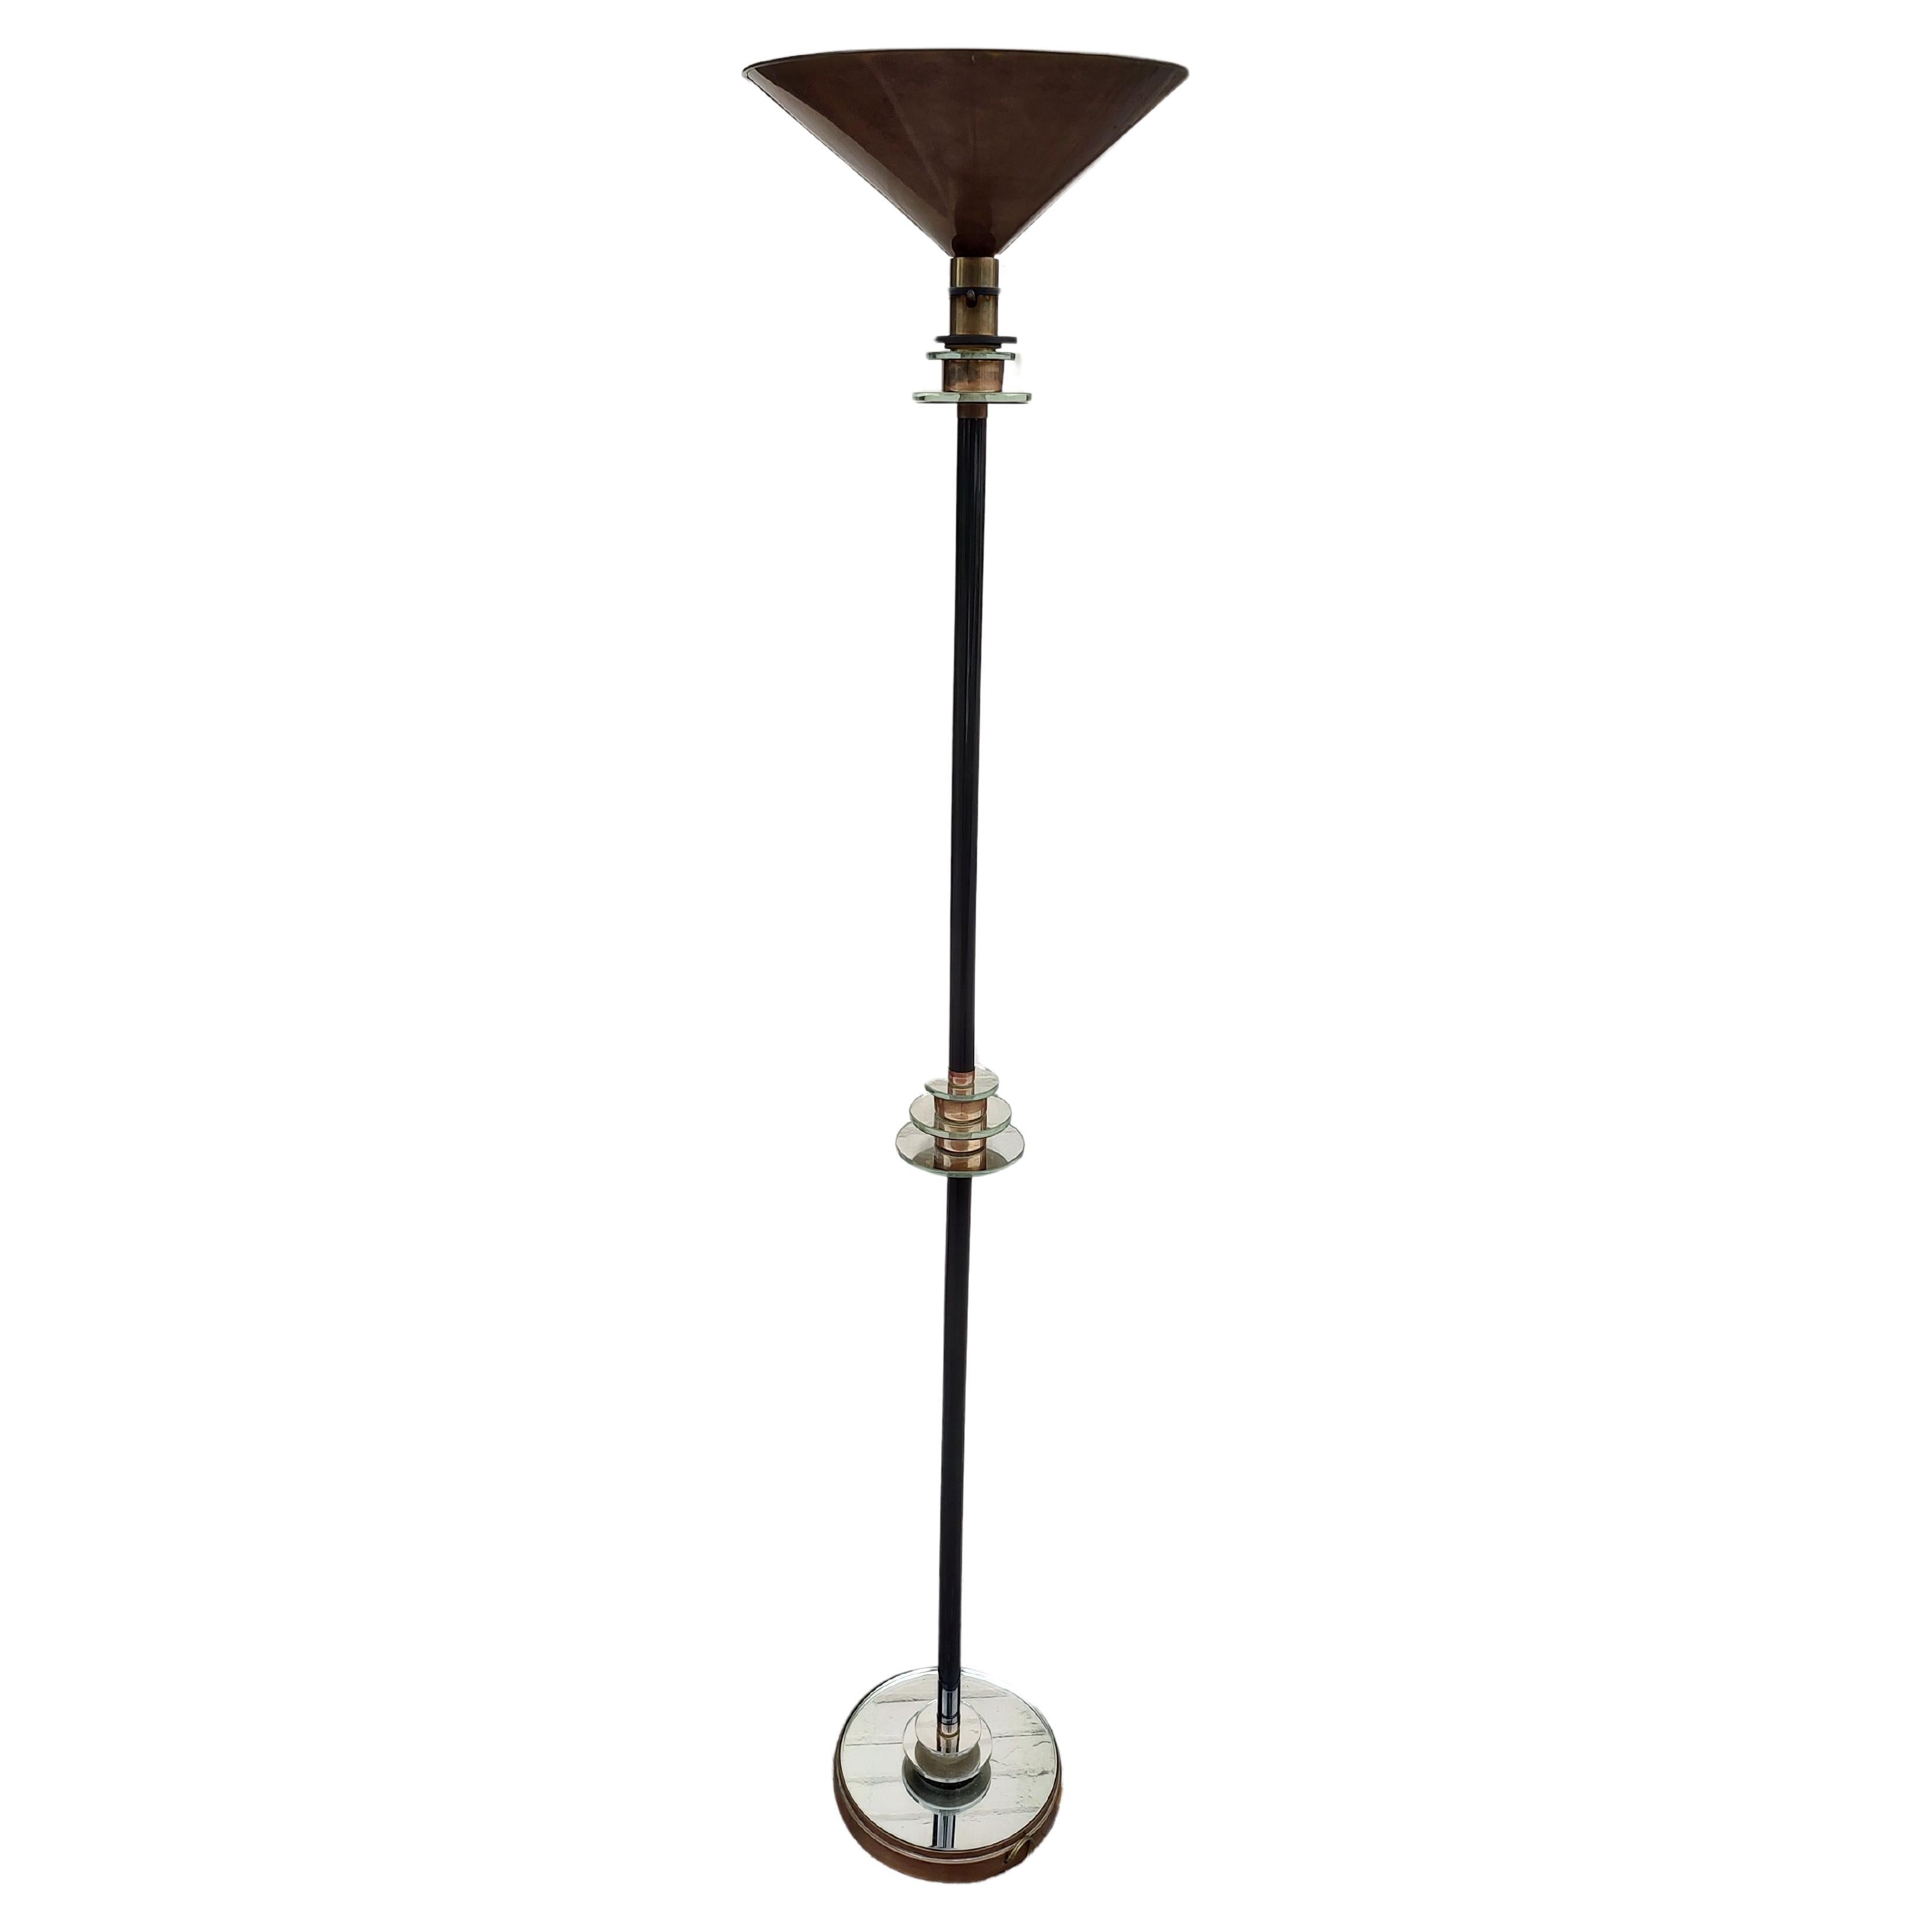 Fabulous Art Deco torchiere floor lamp with a stepped mirror base and accent in the center. Brass shade and entire lamp in excellent vintage condition. Inline dimmer switch.